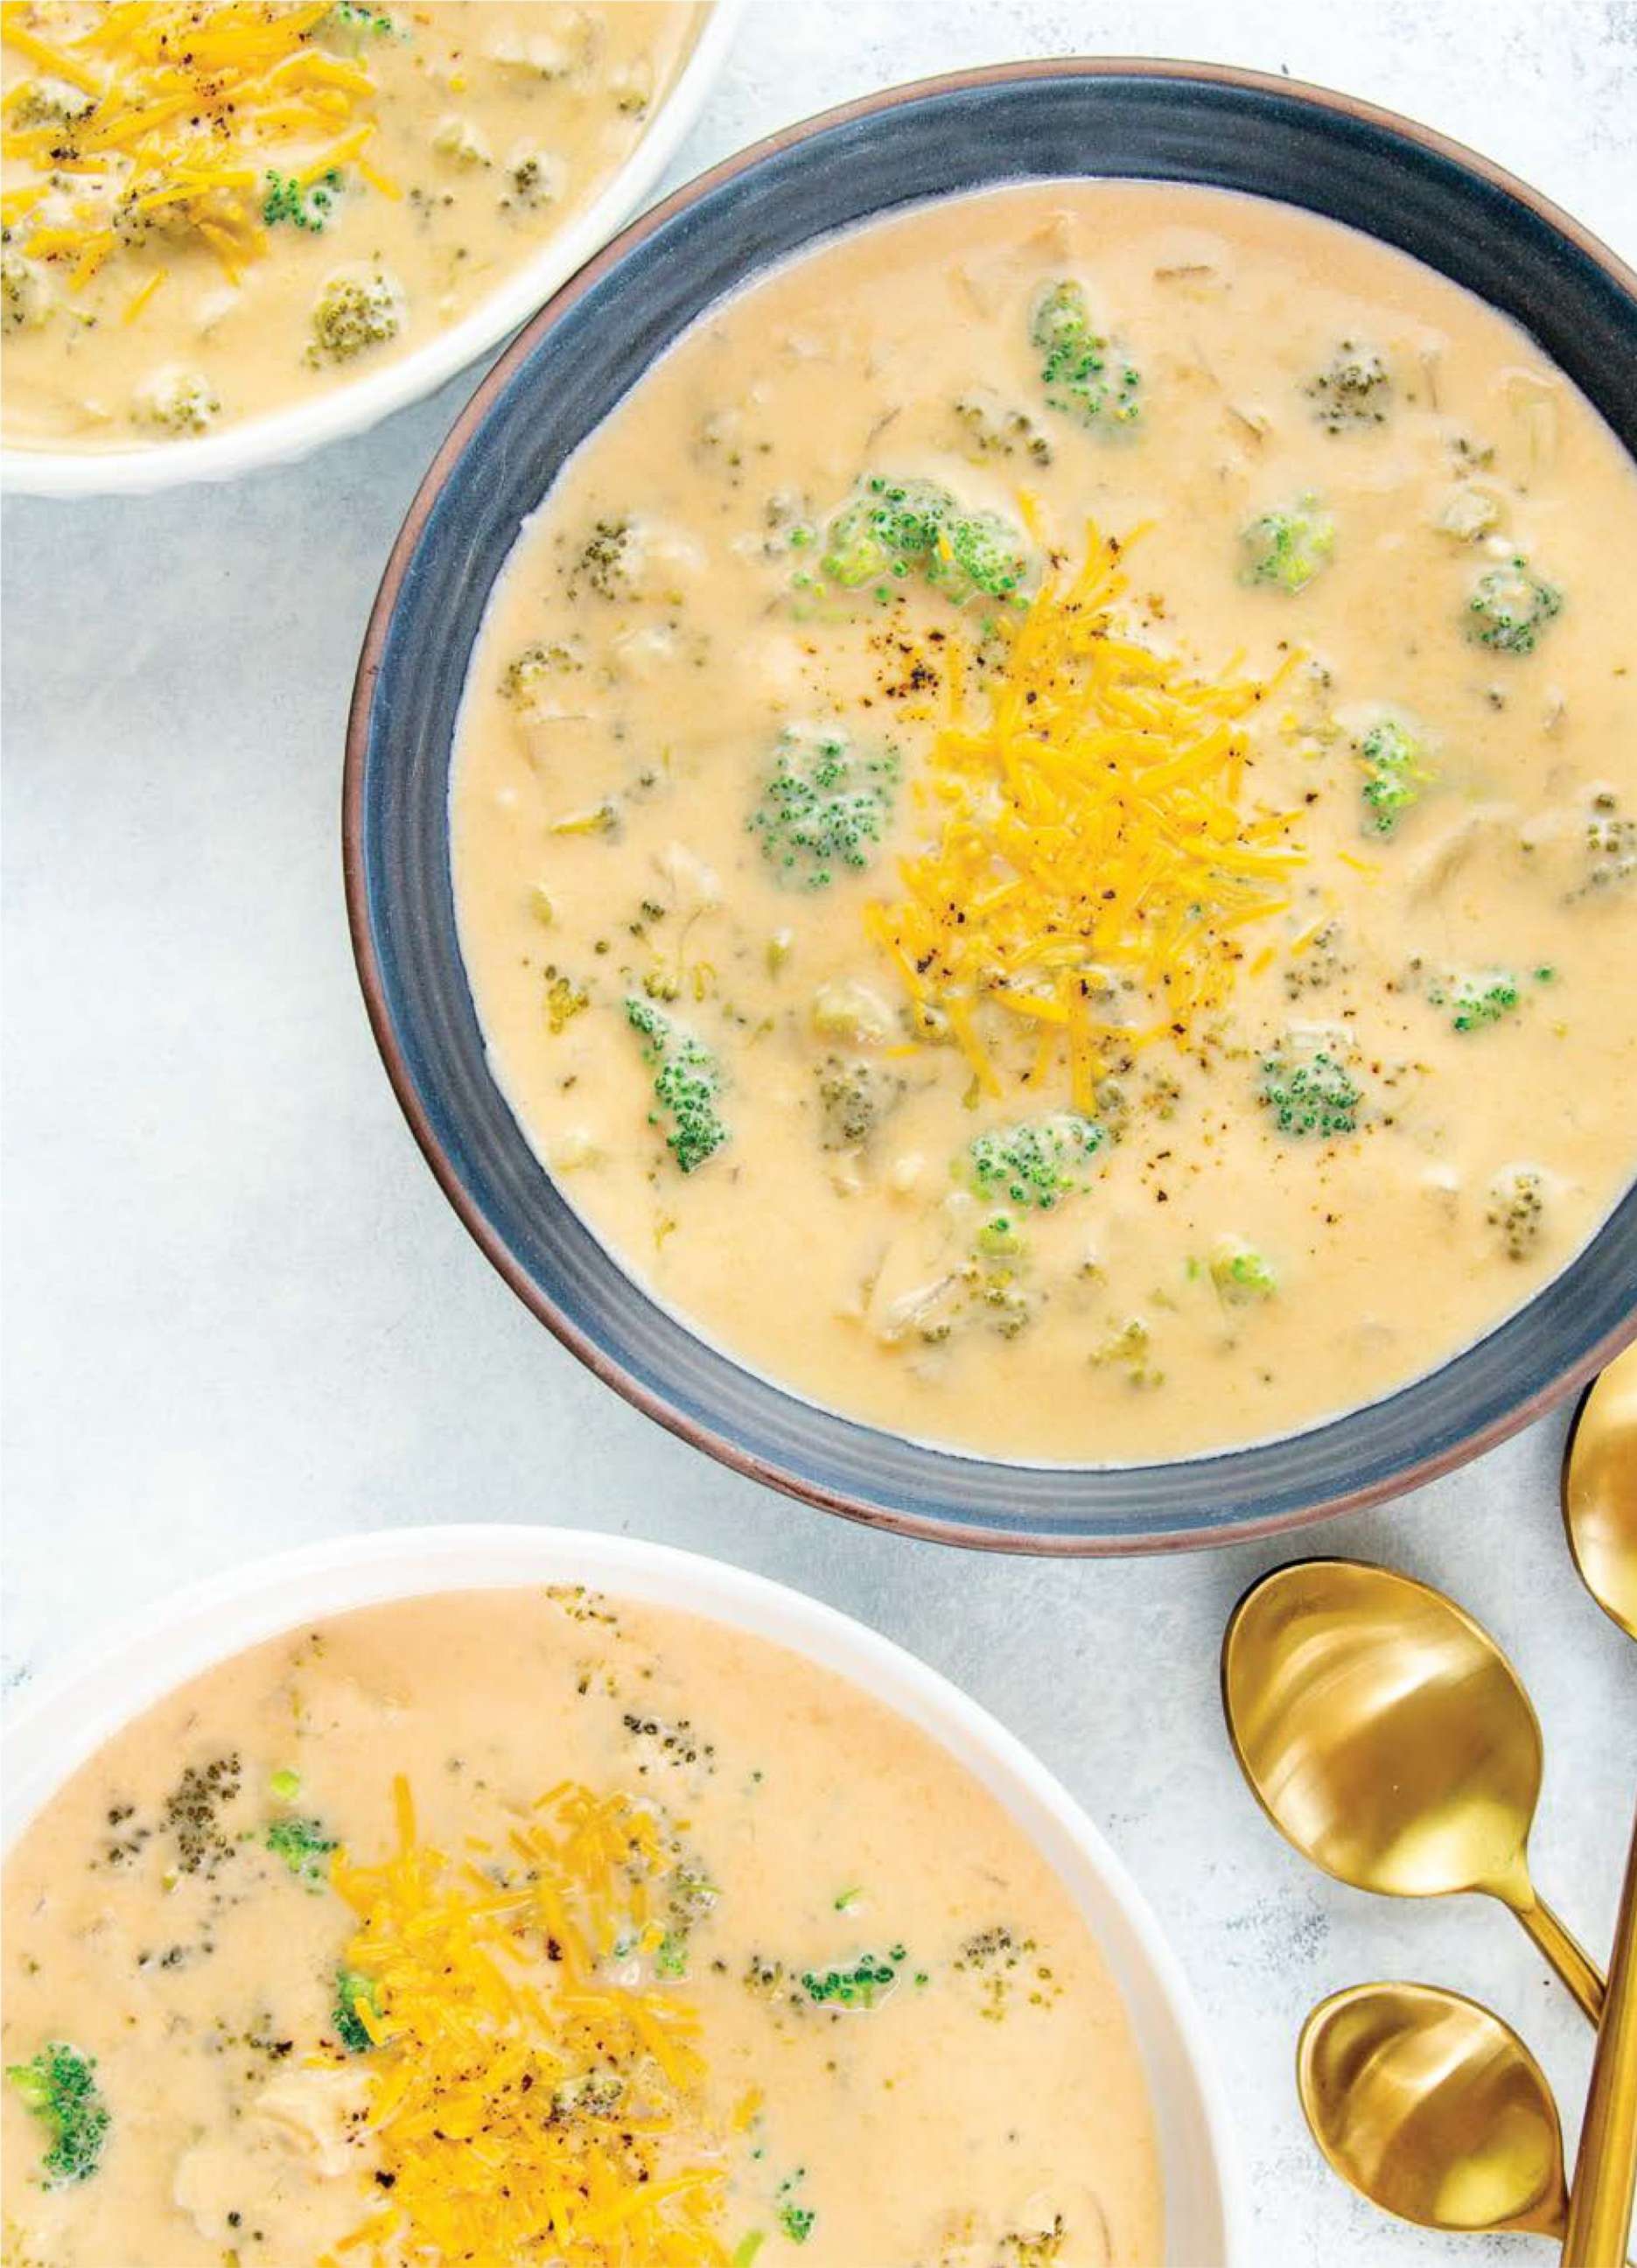 PHOTO: Suzanne Ryan's broccoli cheddar soup is featured in her book "Beyond Simply Keto."